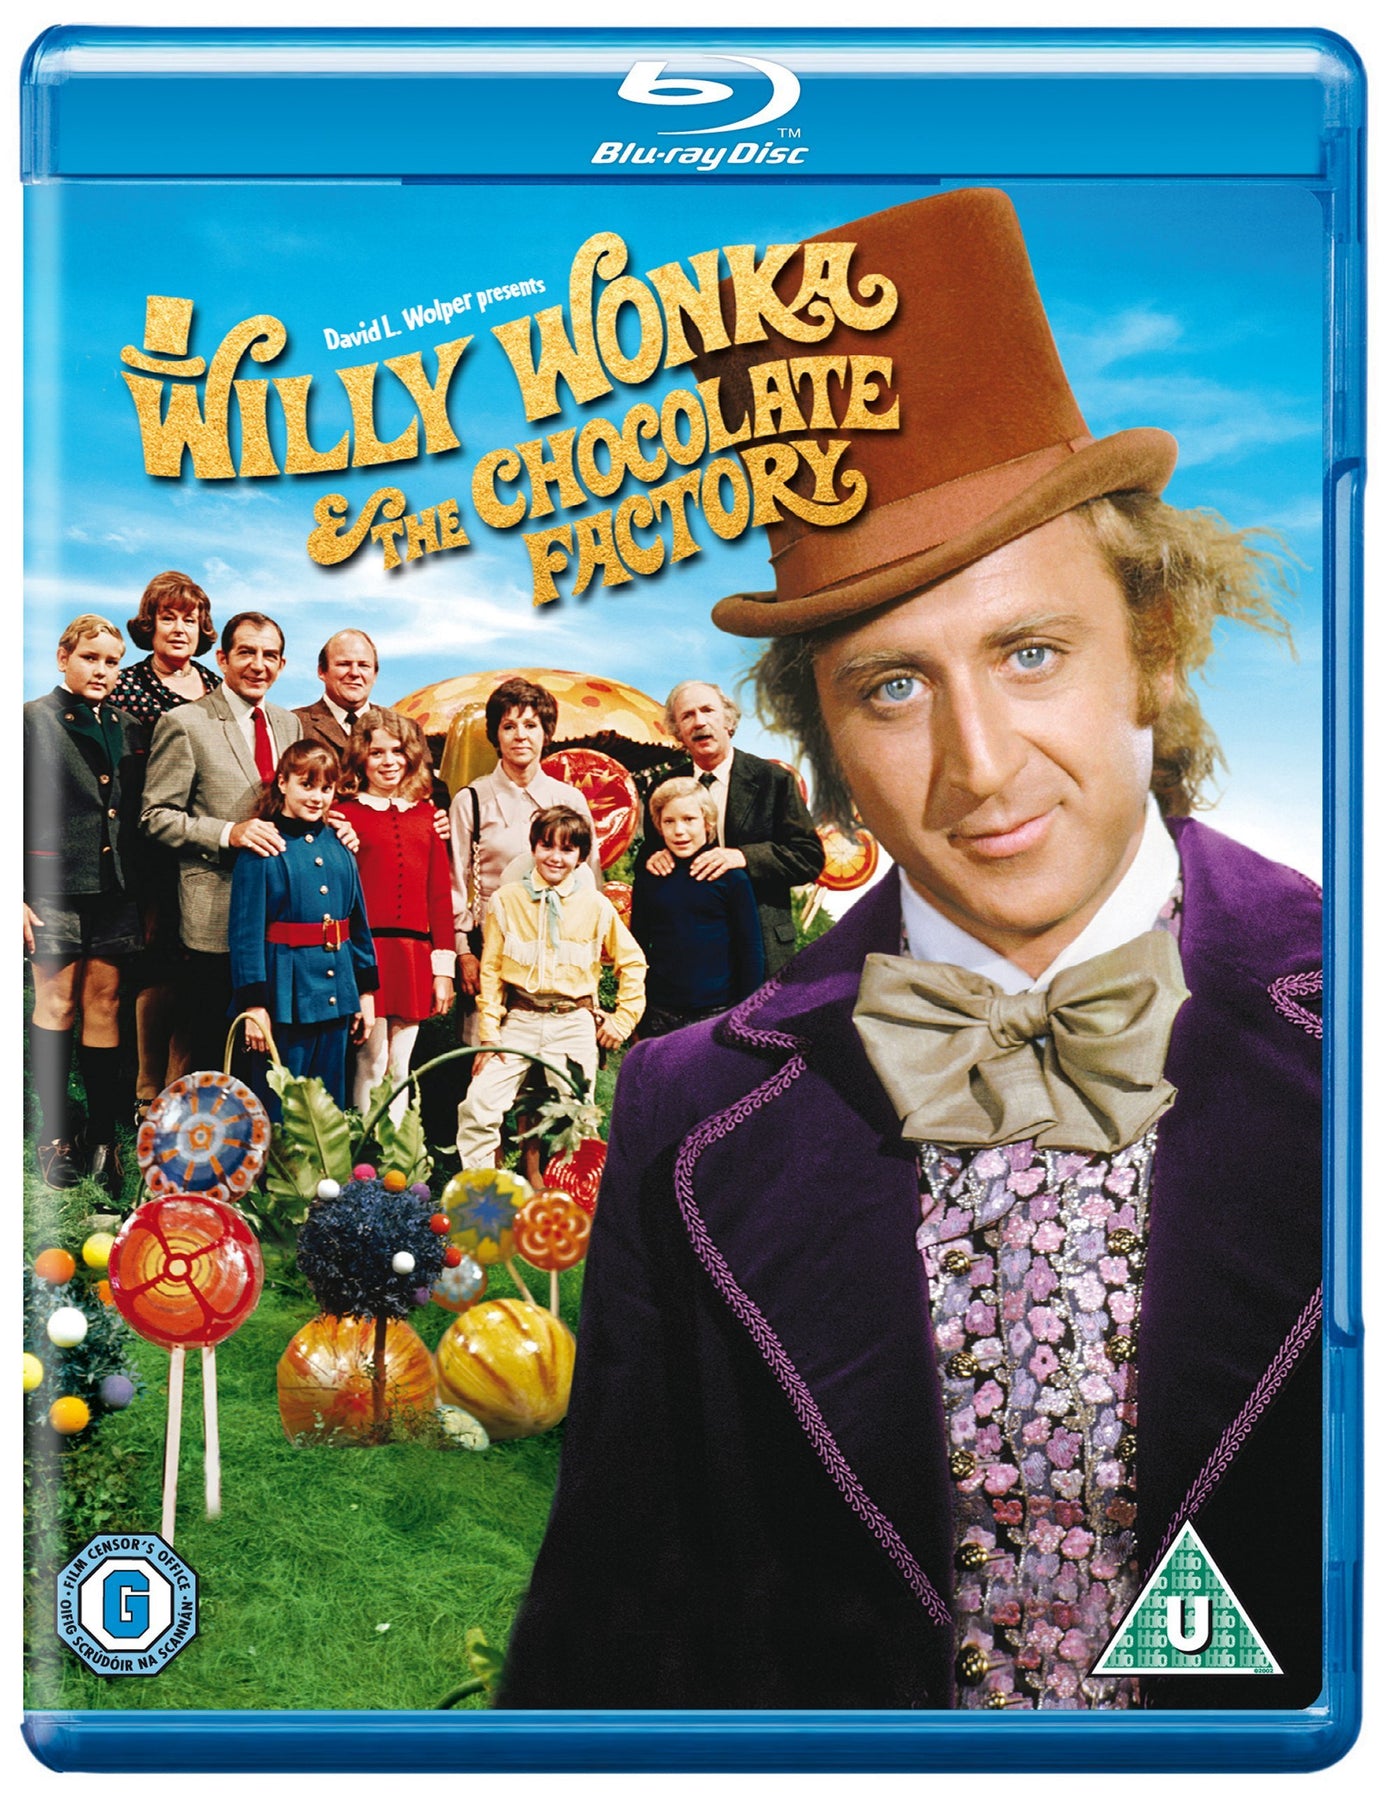 Willy Wonka And The Chocolate Factory (Blu-ray)